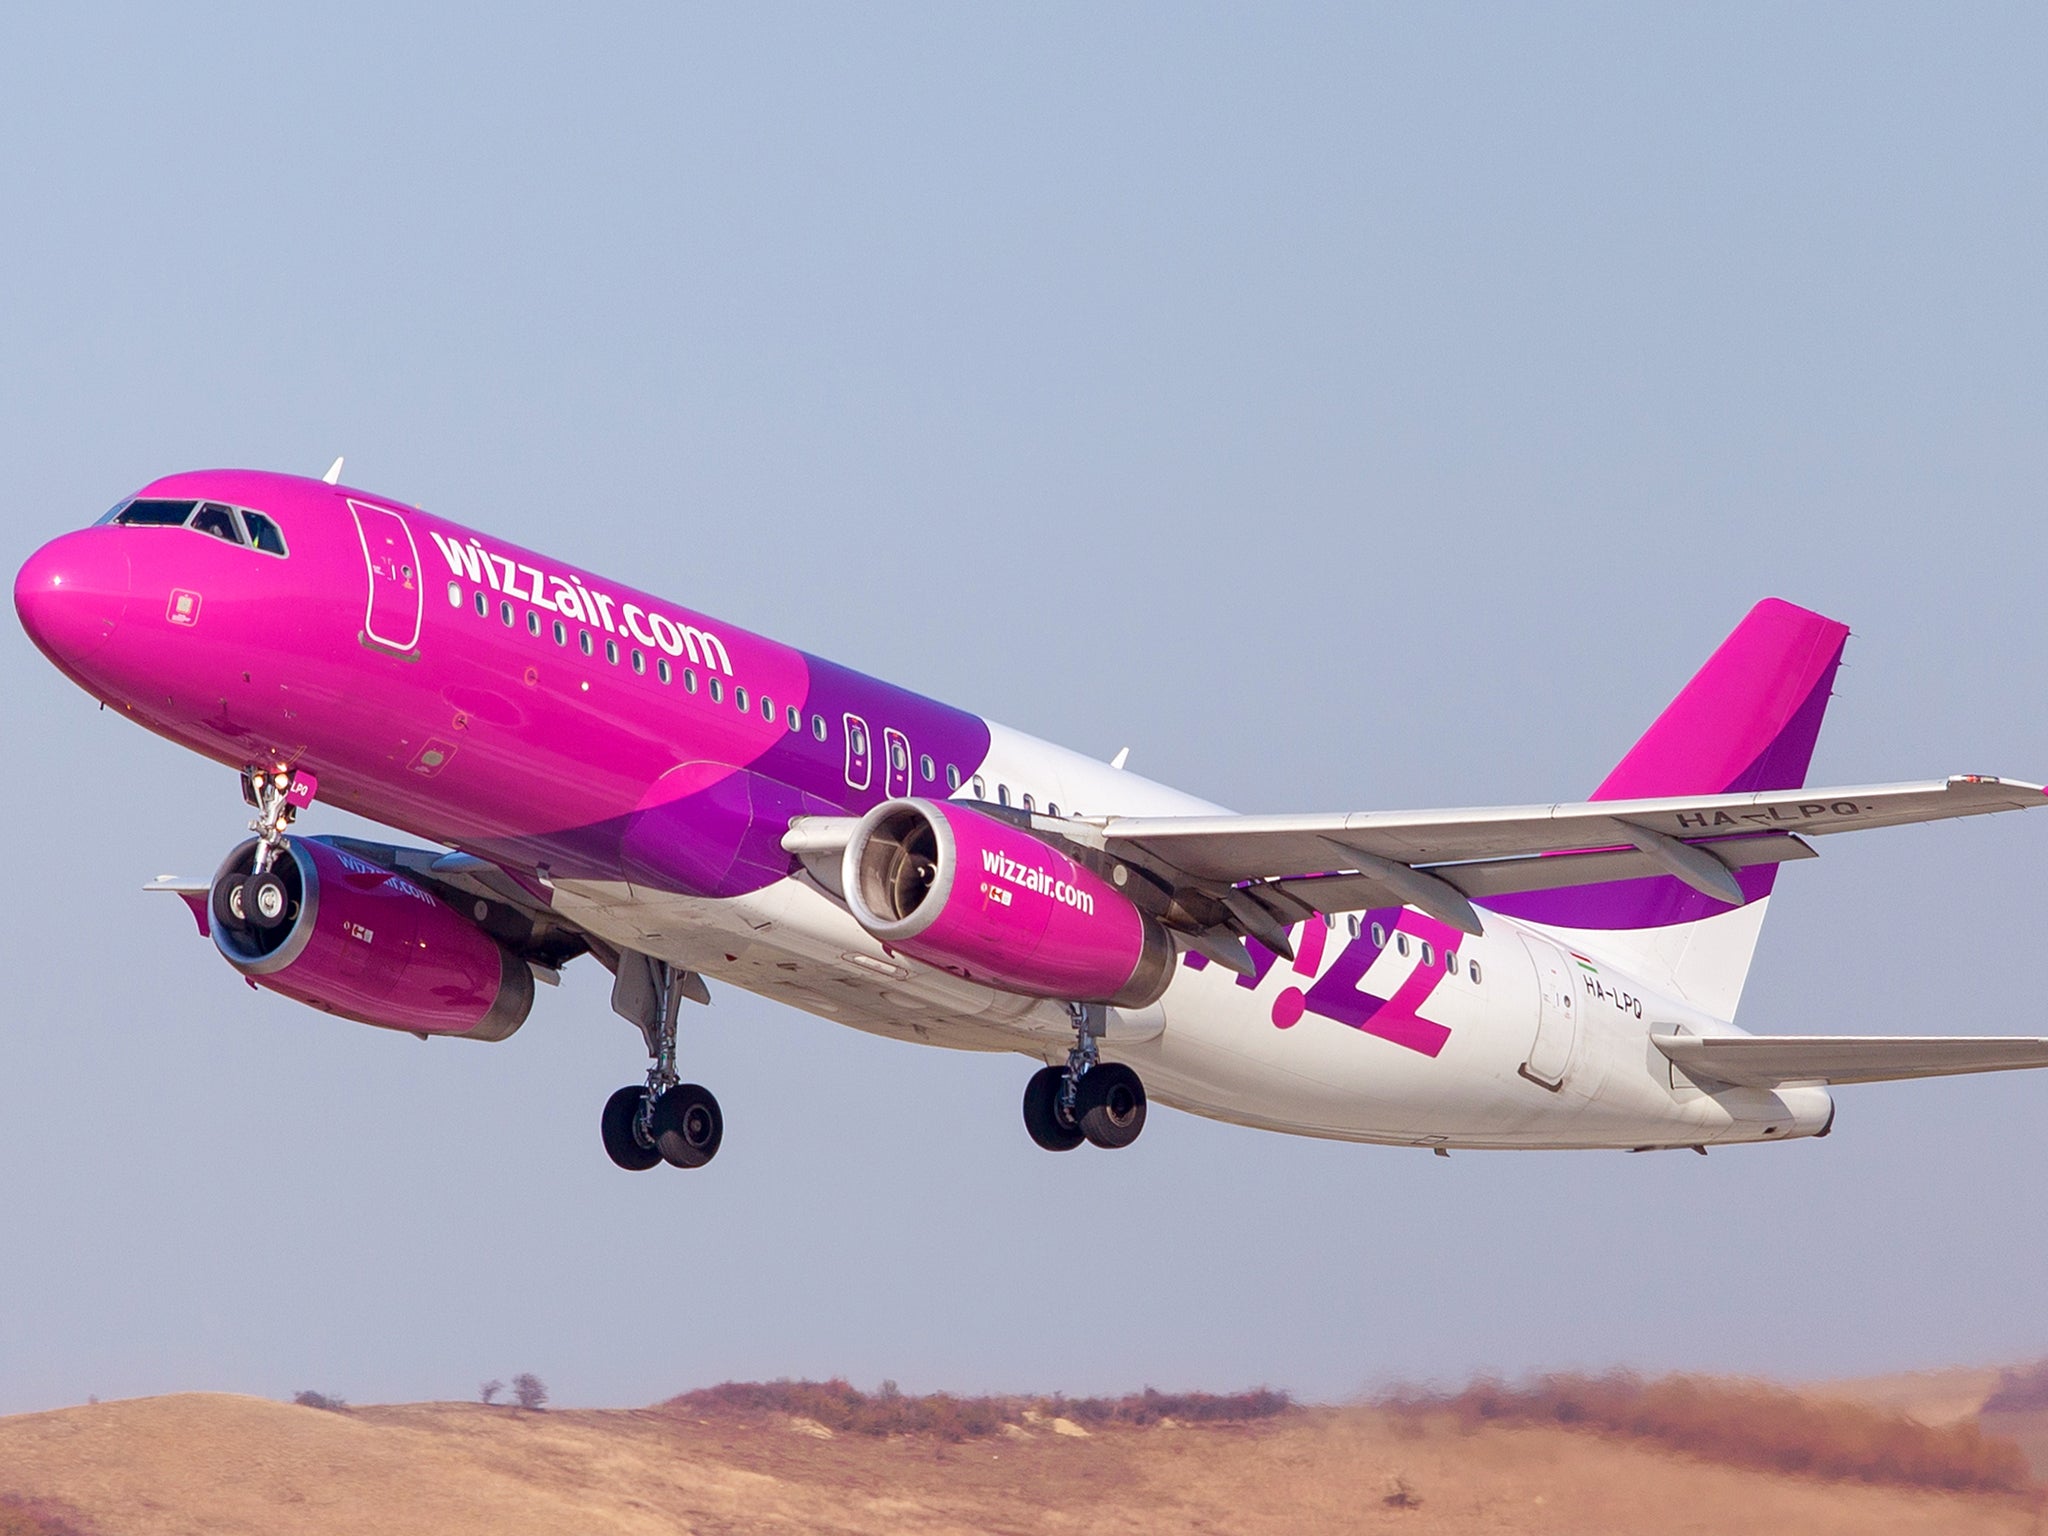 Wizz Air is one of the first European carriers to announce a policy of mandatory vaccination